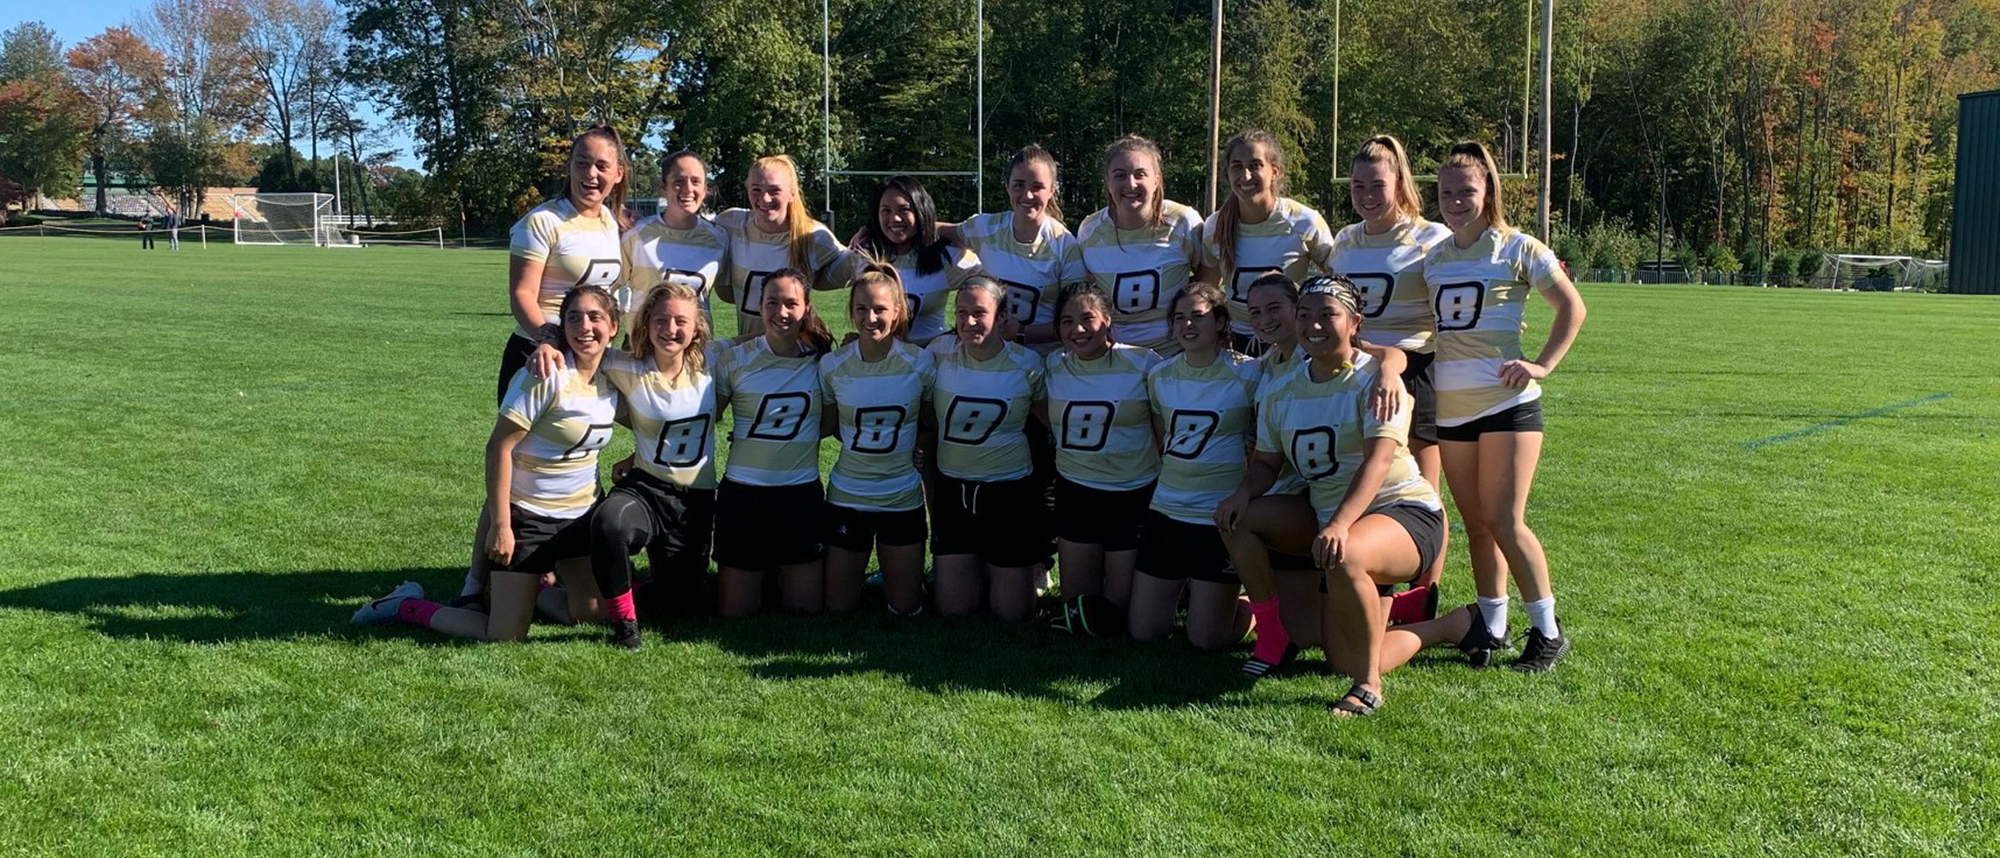 WOMEN’S RUGBY CONTINUES WINNING WAYS